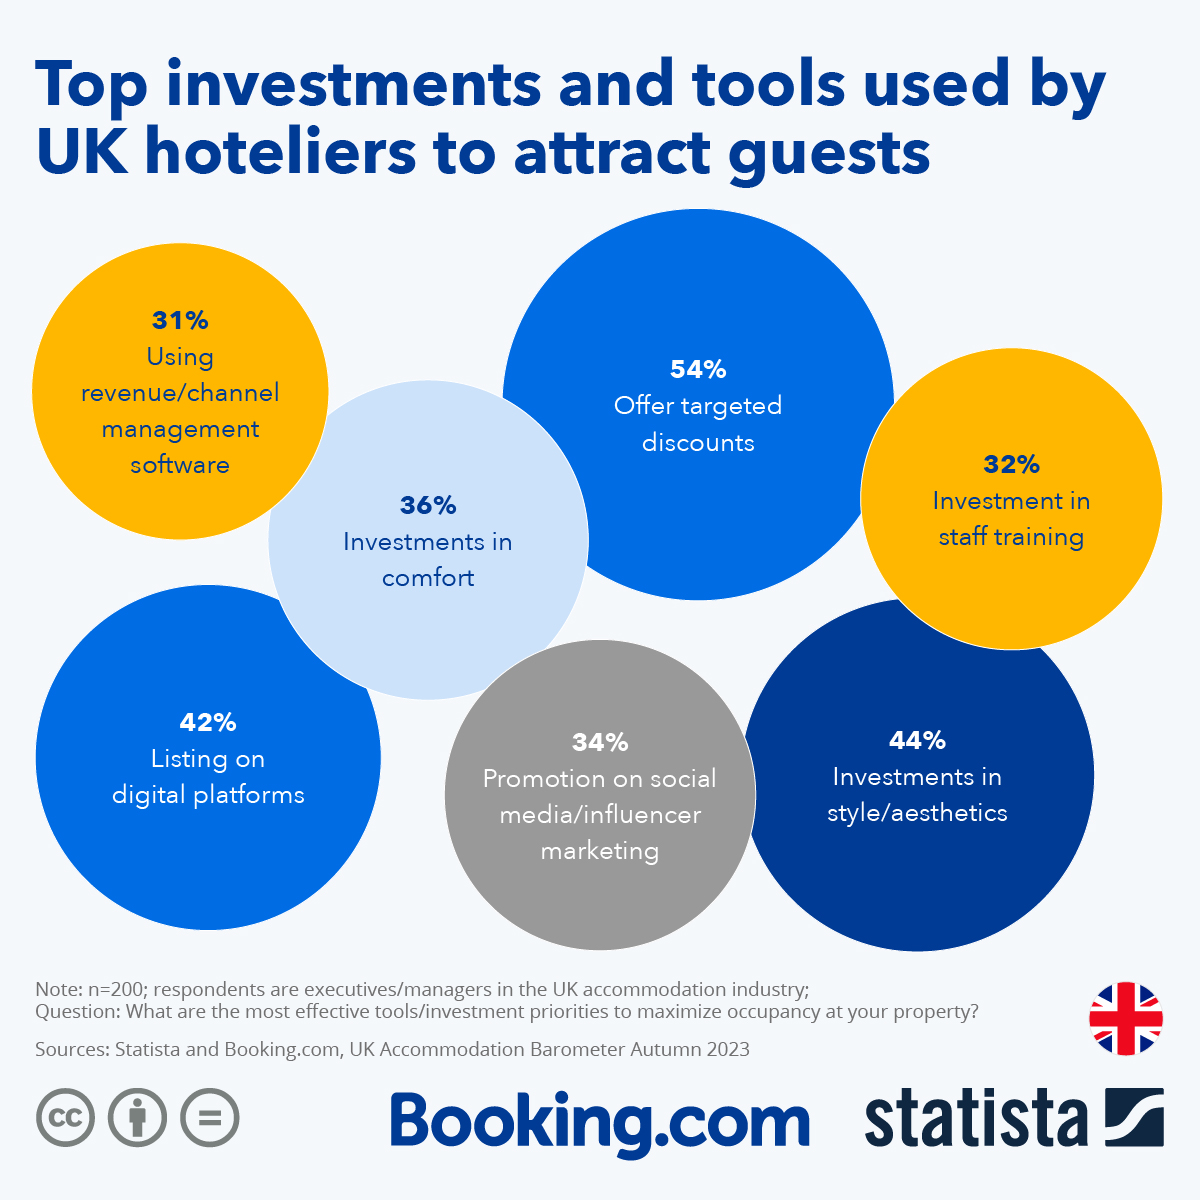 Top Investments and Tools Used By UK Hoteliers to Attract Guests #Hotel #Trip #Travel #Booking.com #statista #holiday